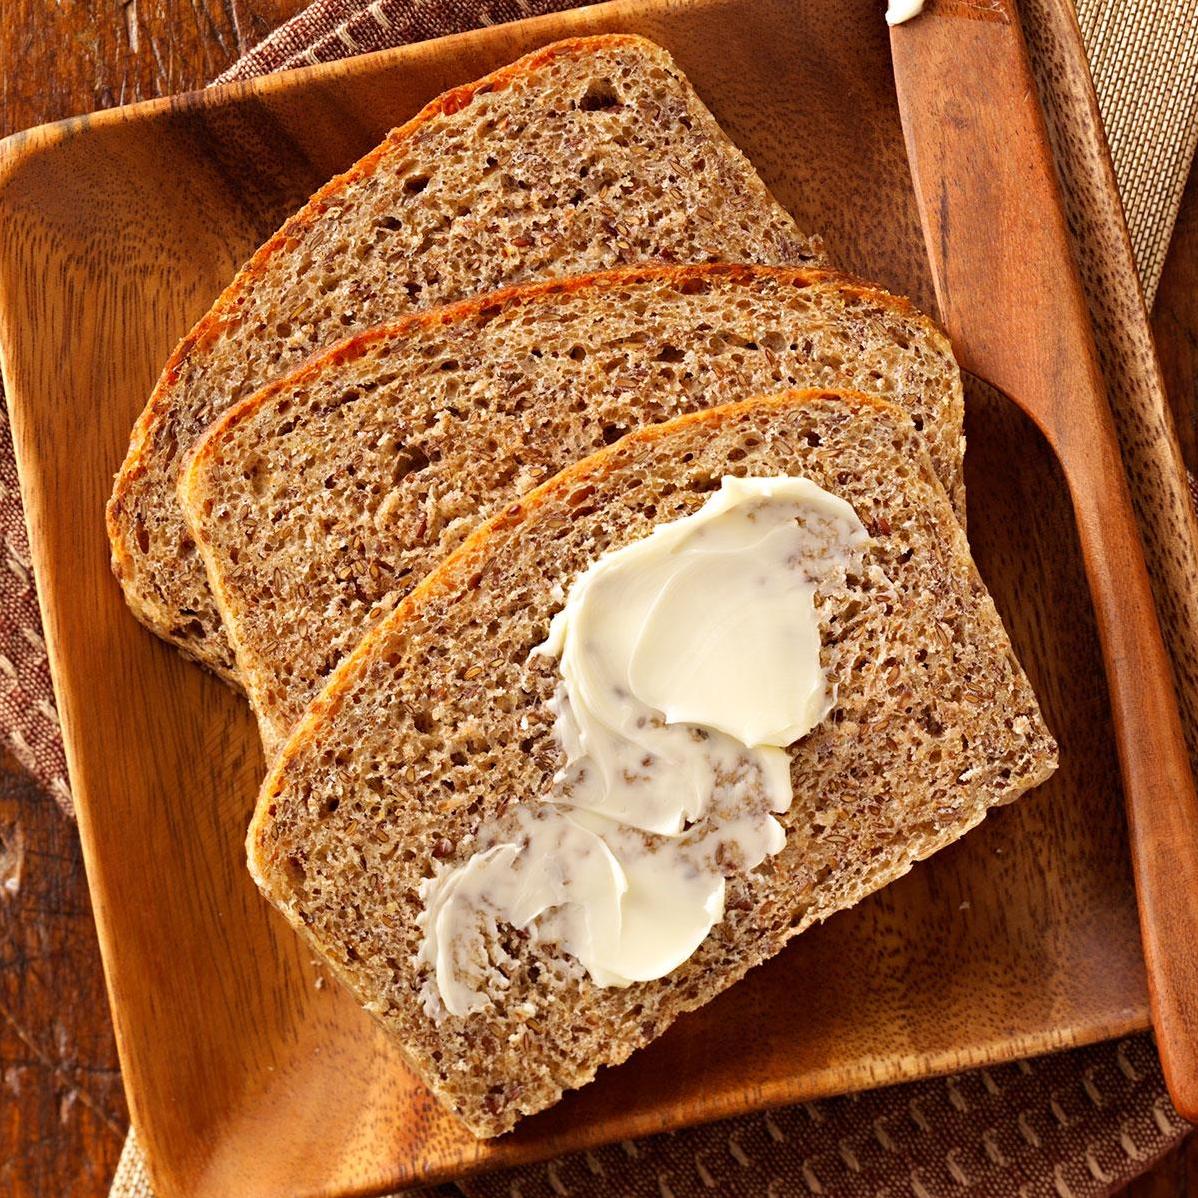  Not only is this bread tasty, but it's also a great source of fiber and omega-3s.